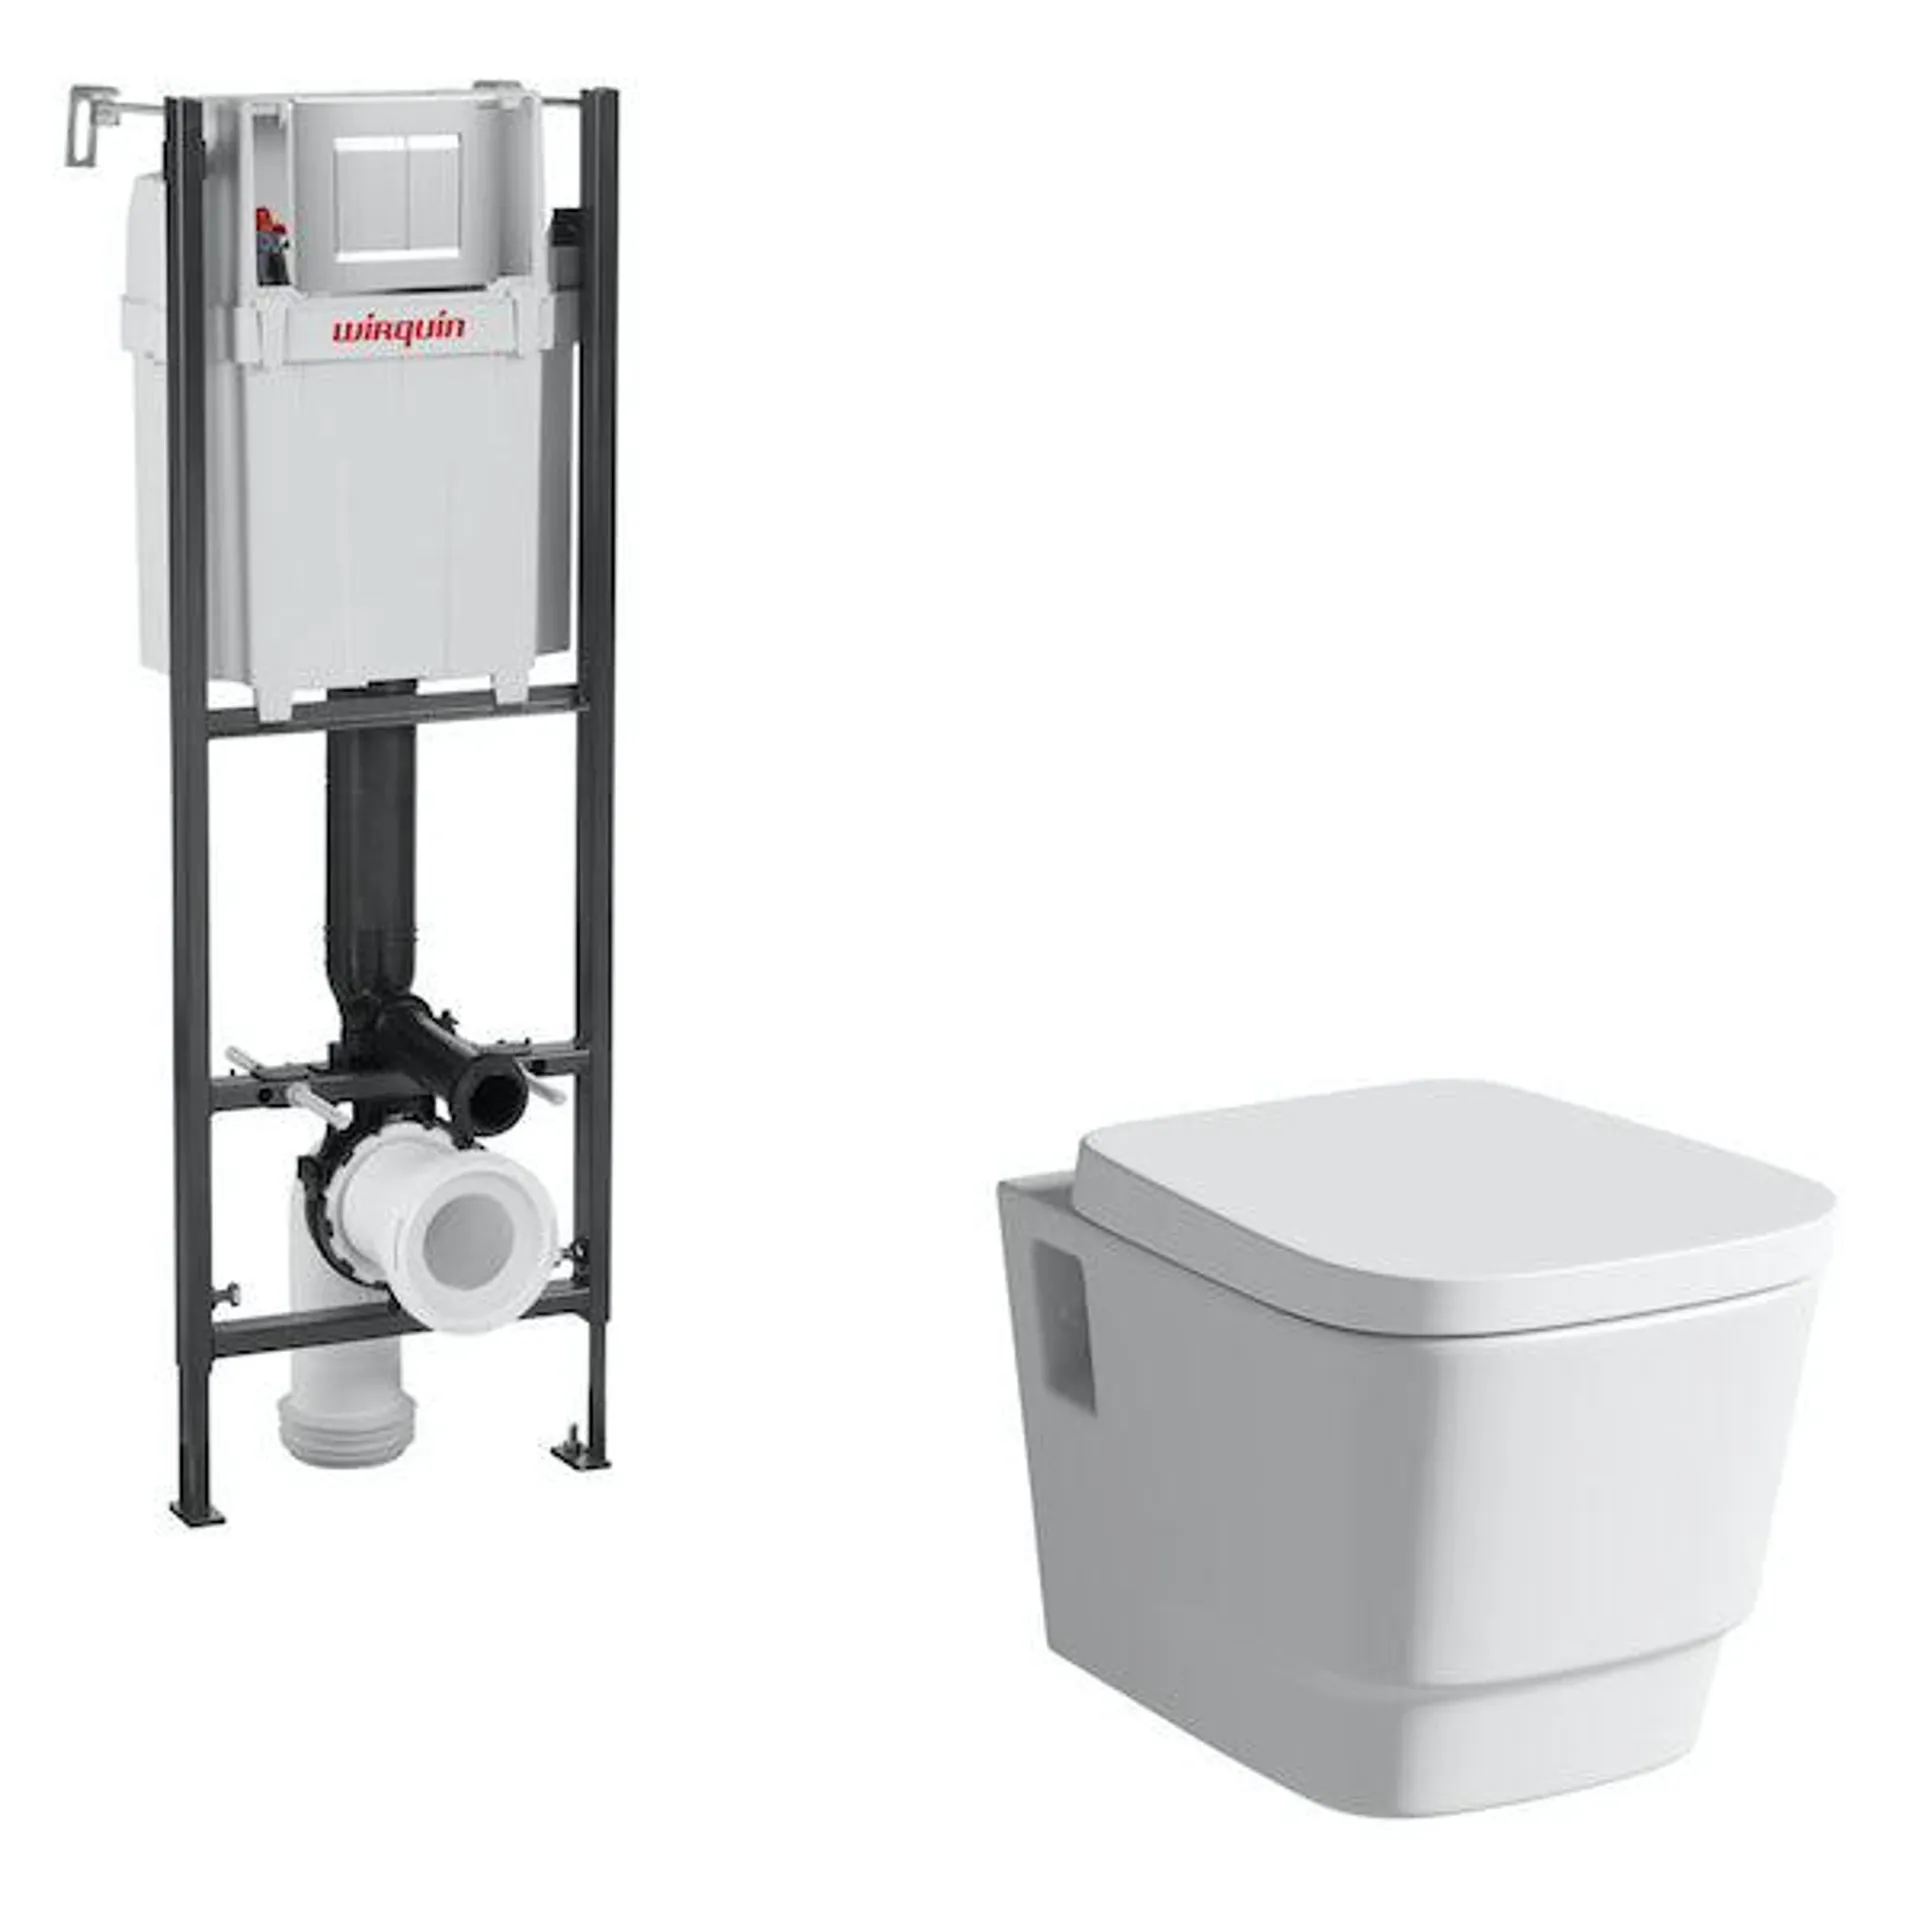 Mode Foster wall hung toilet and wall mounting frame with push plate cistern